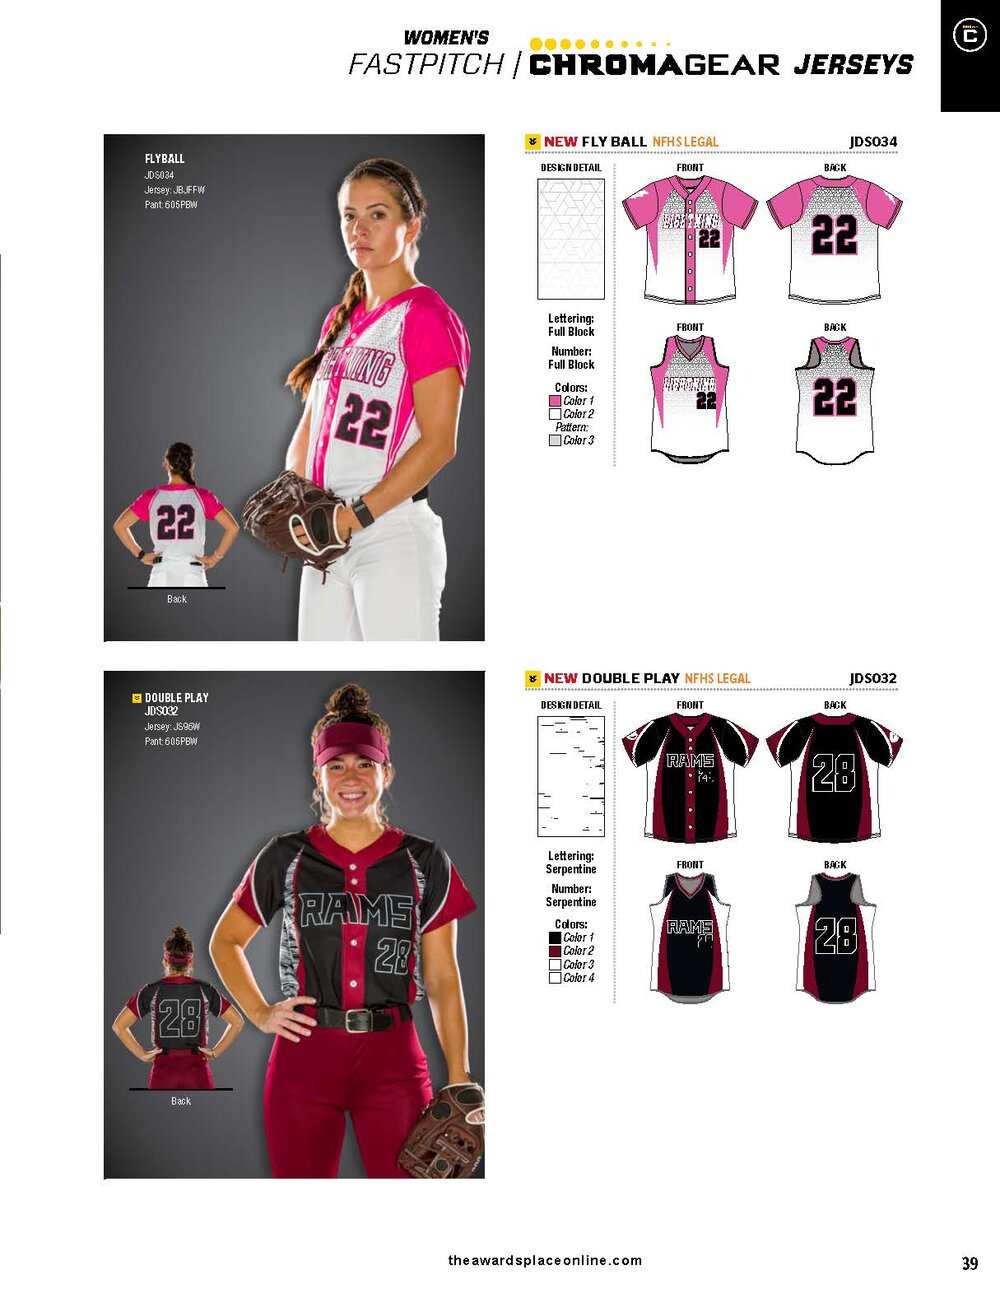 Fastpitch Catalog — The Awards Place